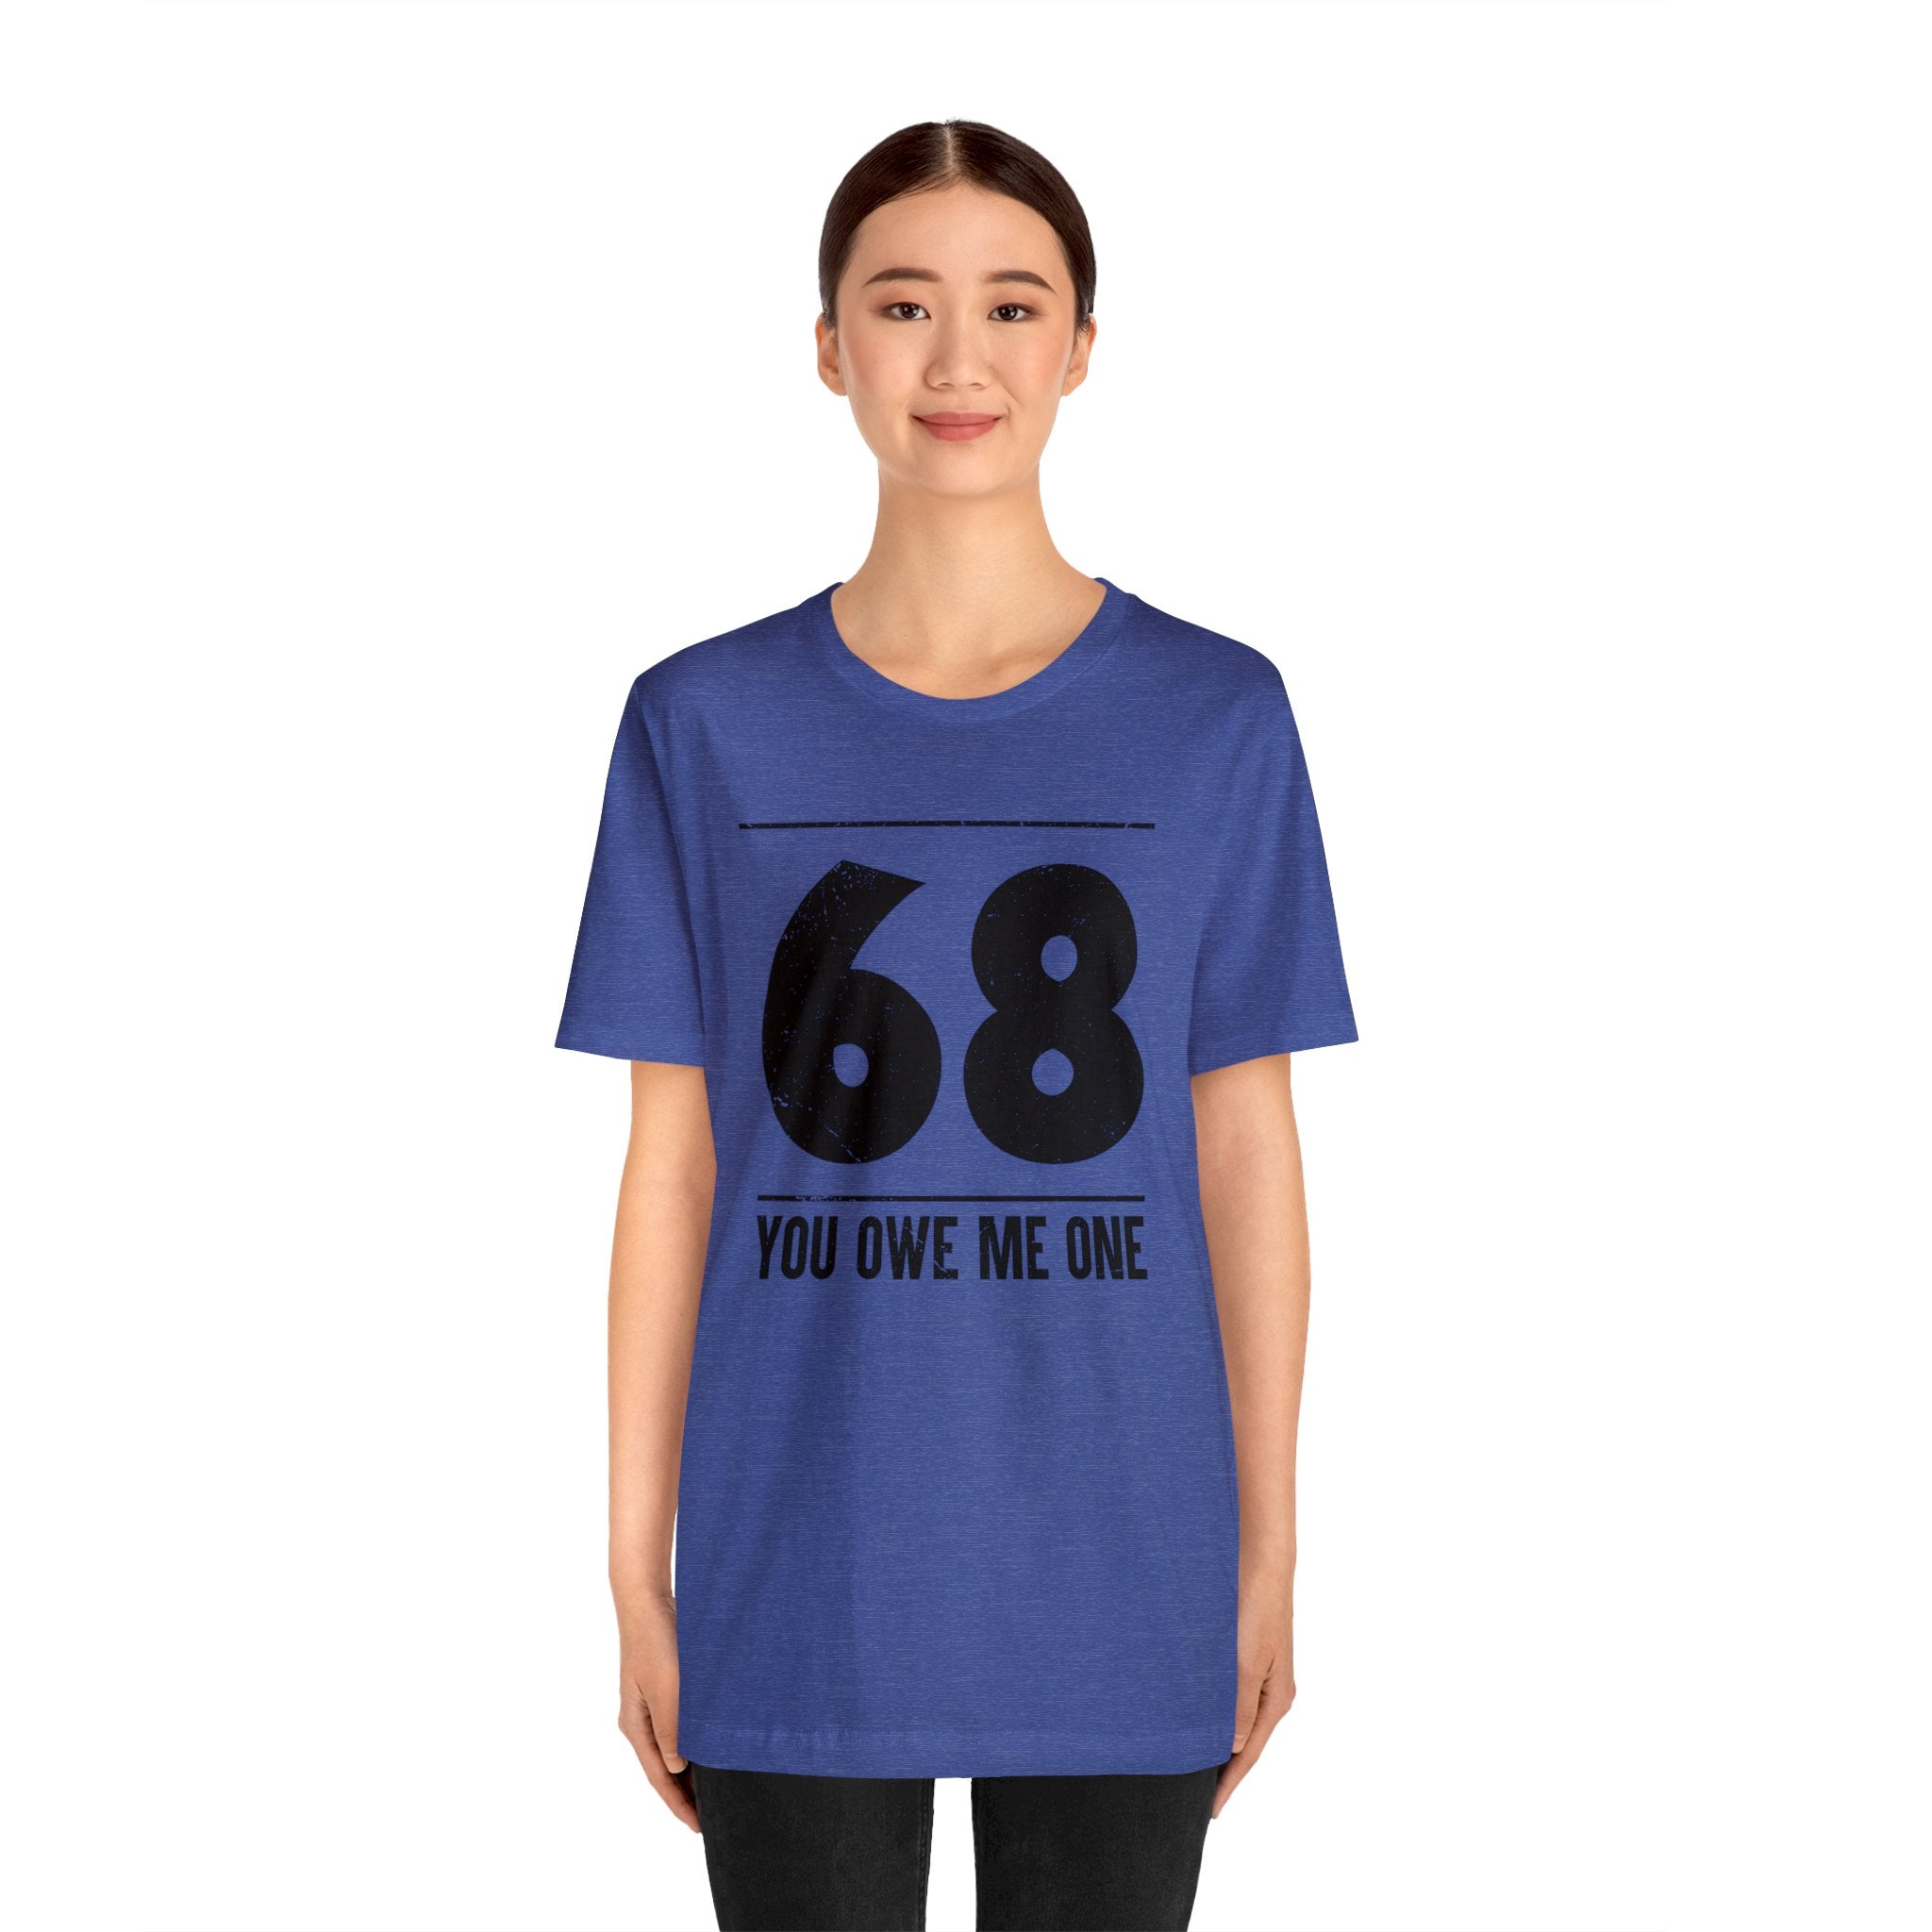 A woman wearing a geeky t-shirt that says "68 You Owe Me One" - an awesome deal.